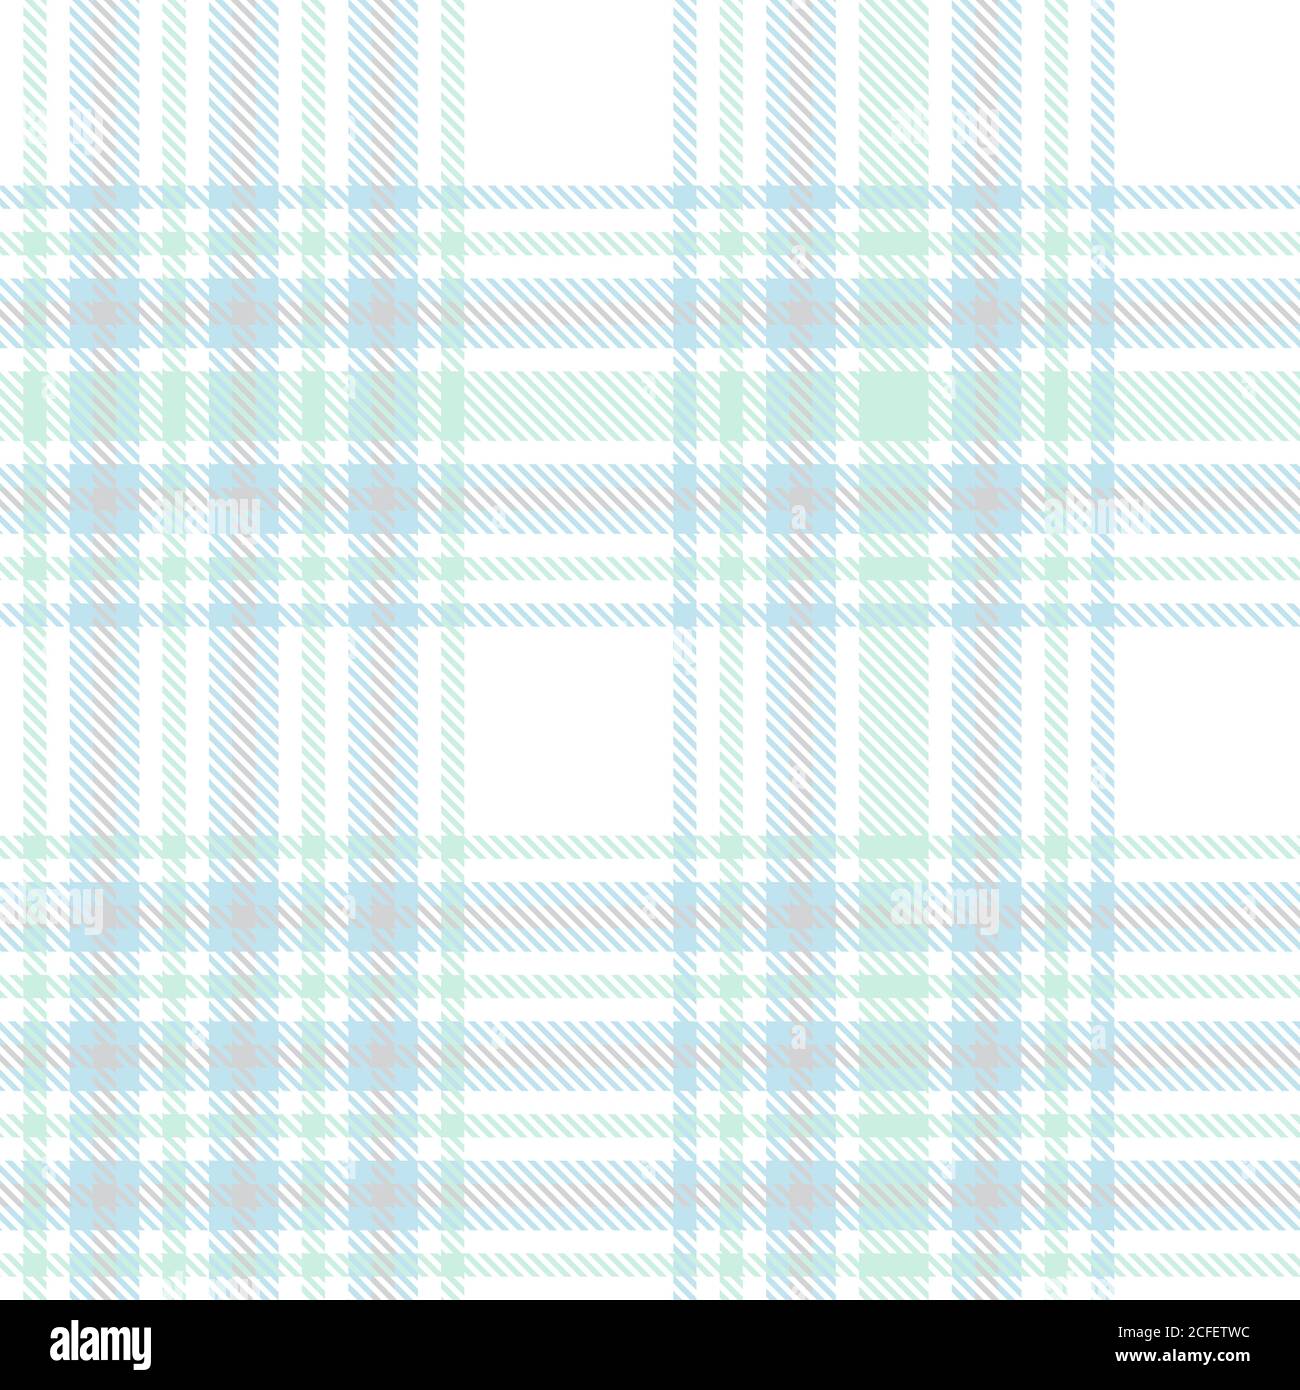 Glen Plaid textured seamless pattern suitable for fashion textiles and graphics Stock Vector